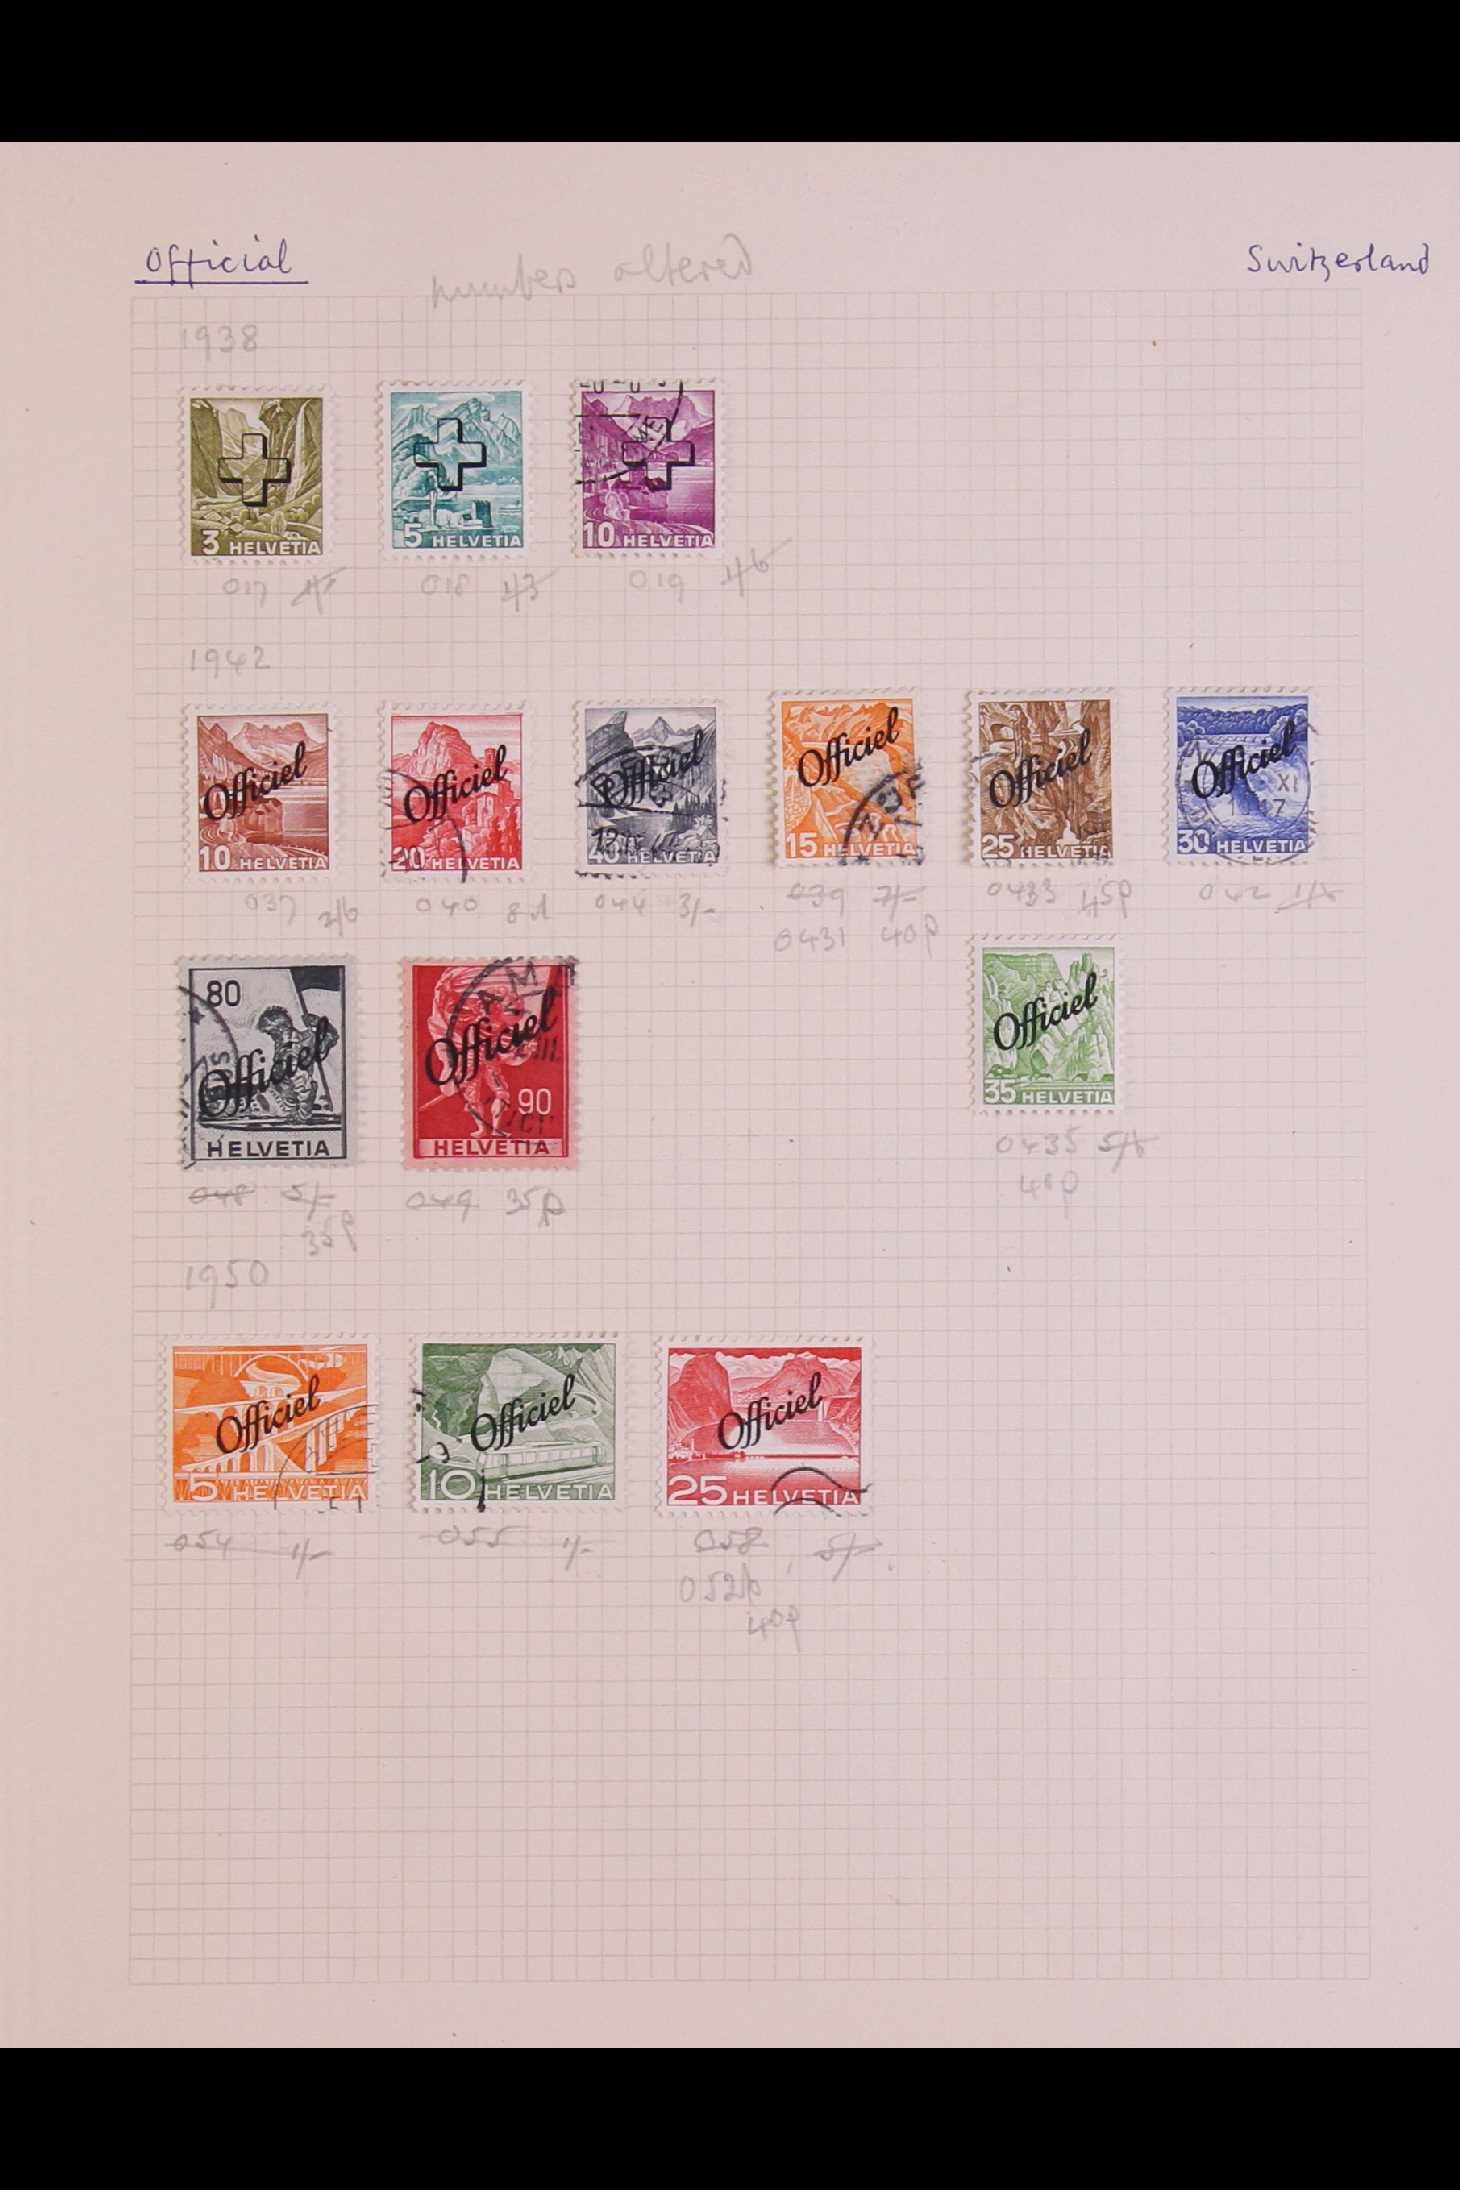 SWITZERLAND 1850 - 1959 COLLECTION of chiefly used stamps on leaves, incl 1850 5r & 10r, 1851 5r, - Image 14 of 17